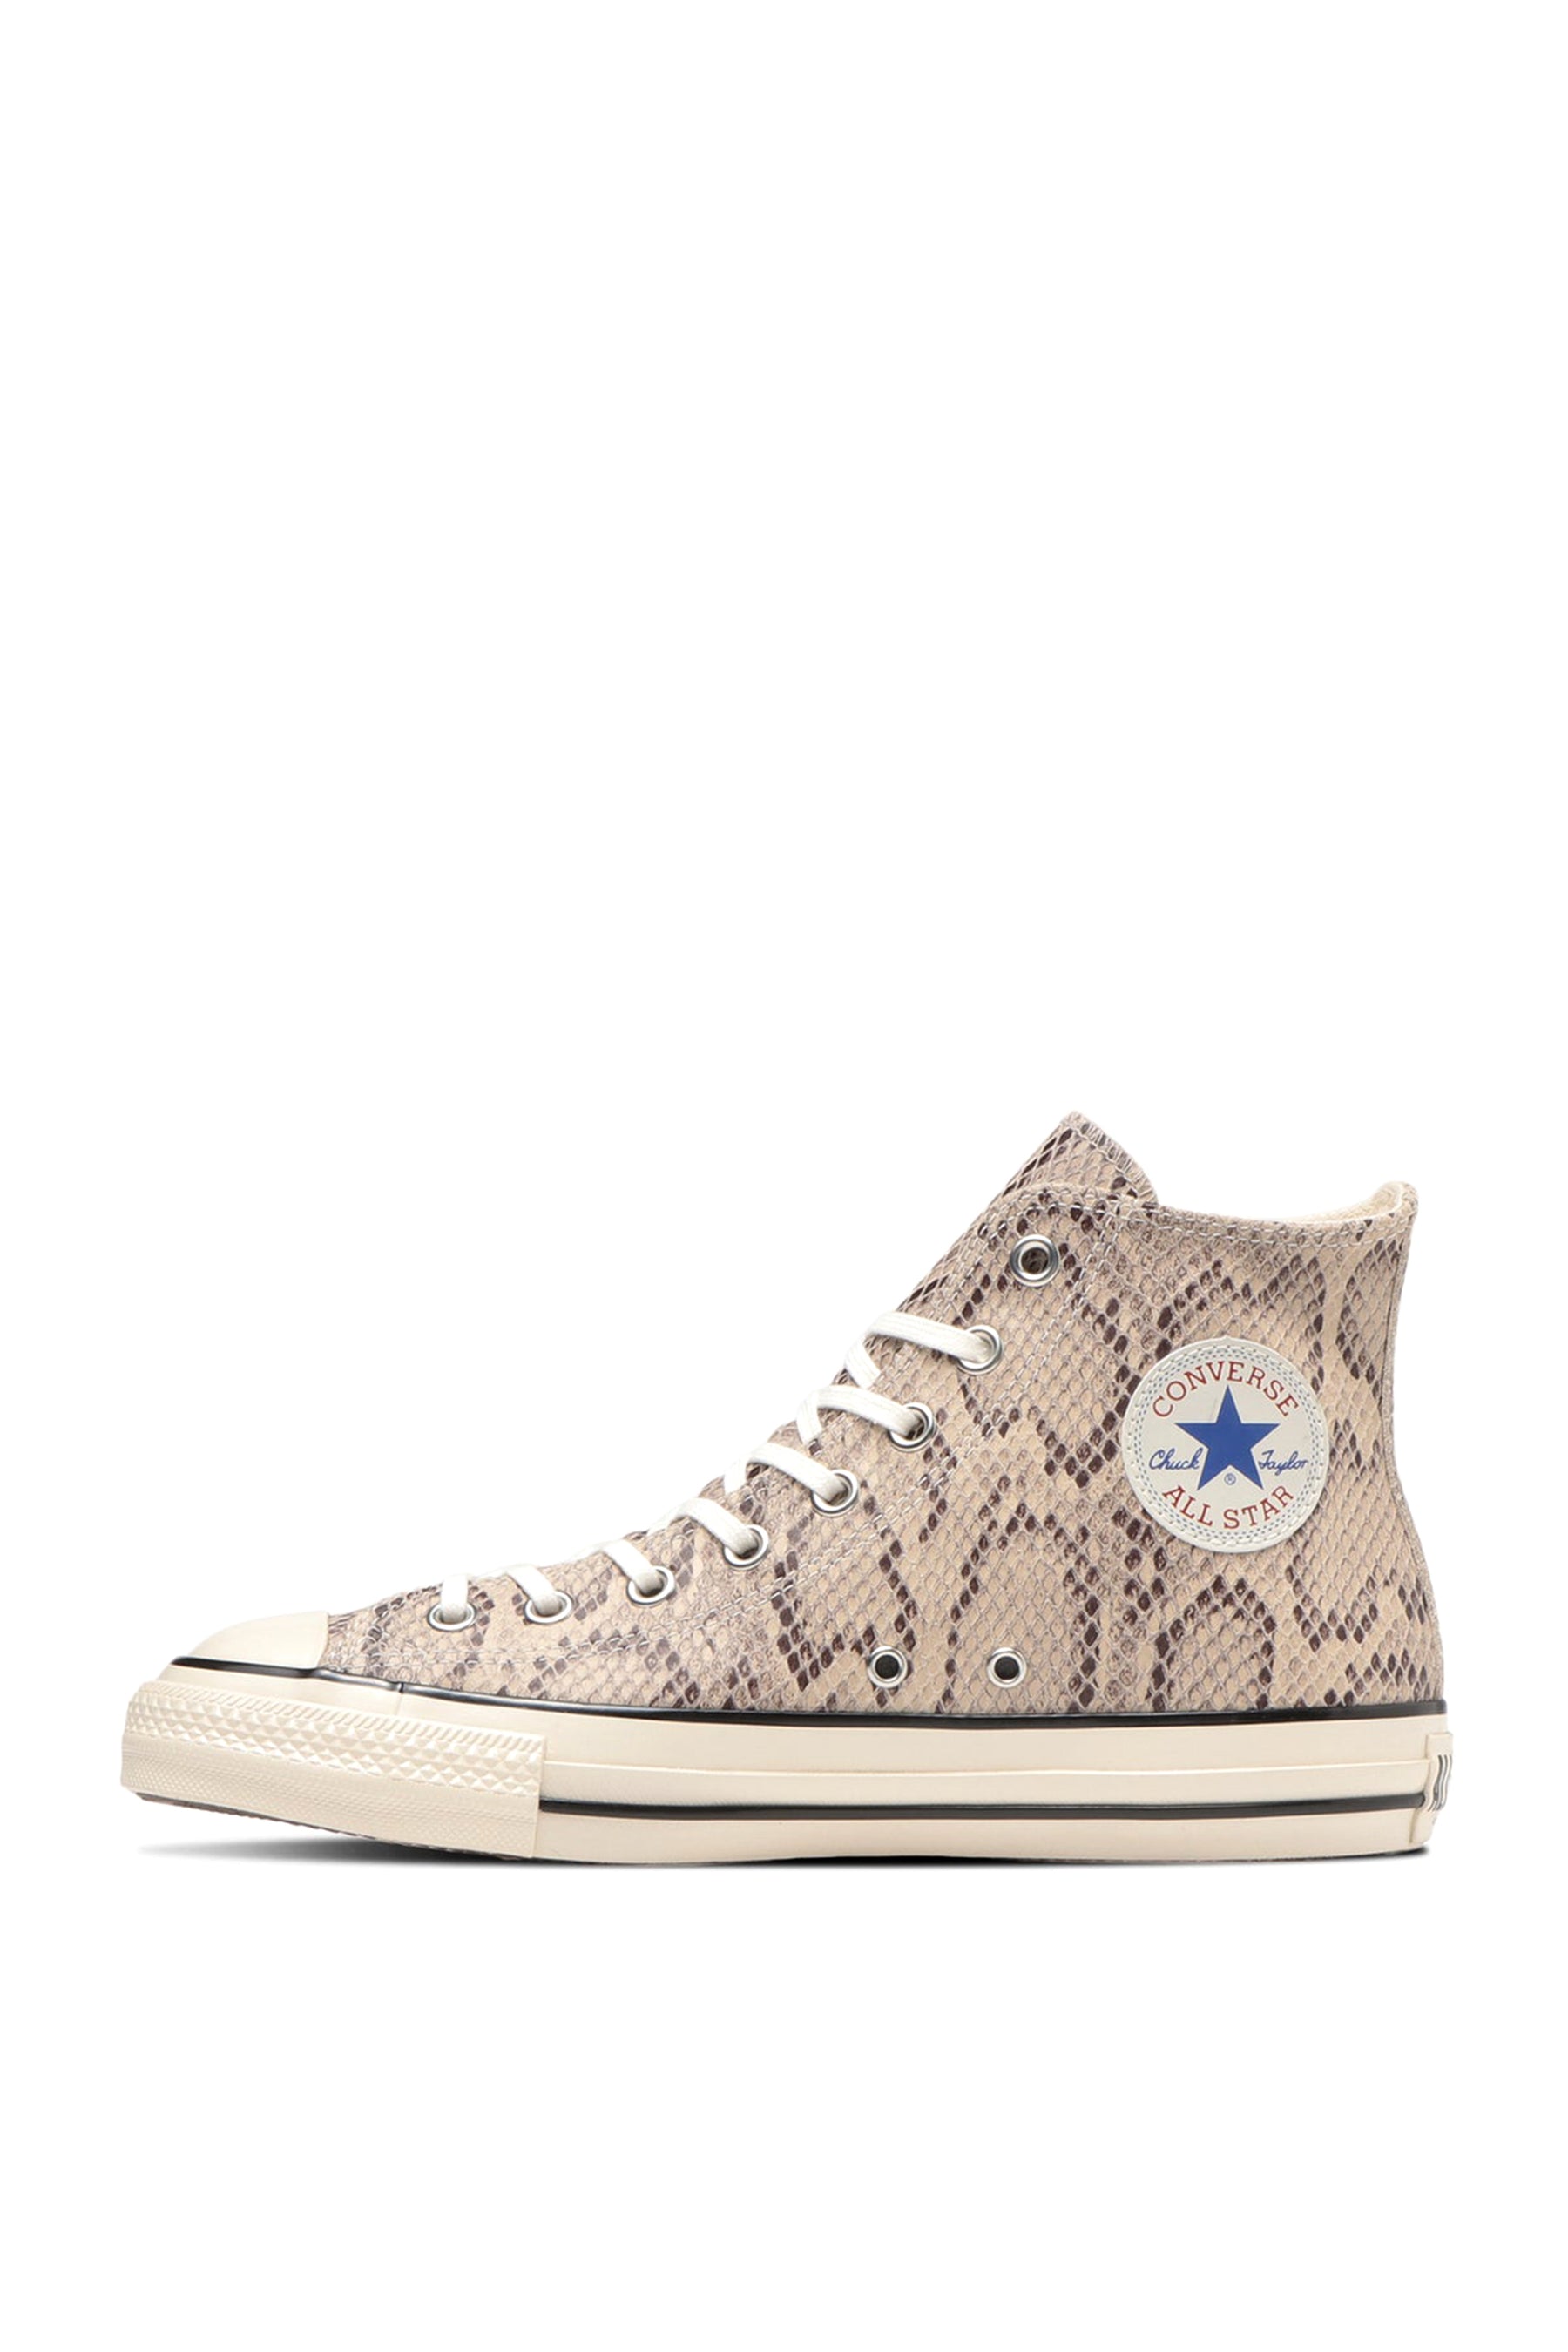 CONVERSE SS23 LEATHER ALL STAR US PYTHON HI / NATURAL - NUBIAN